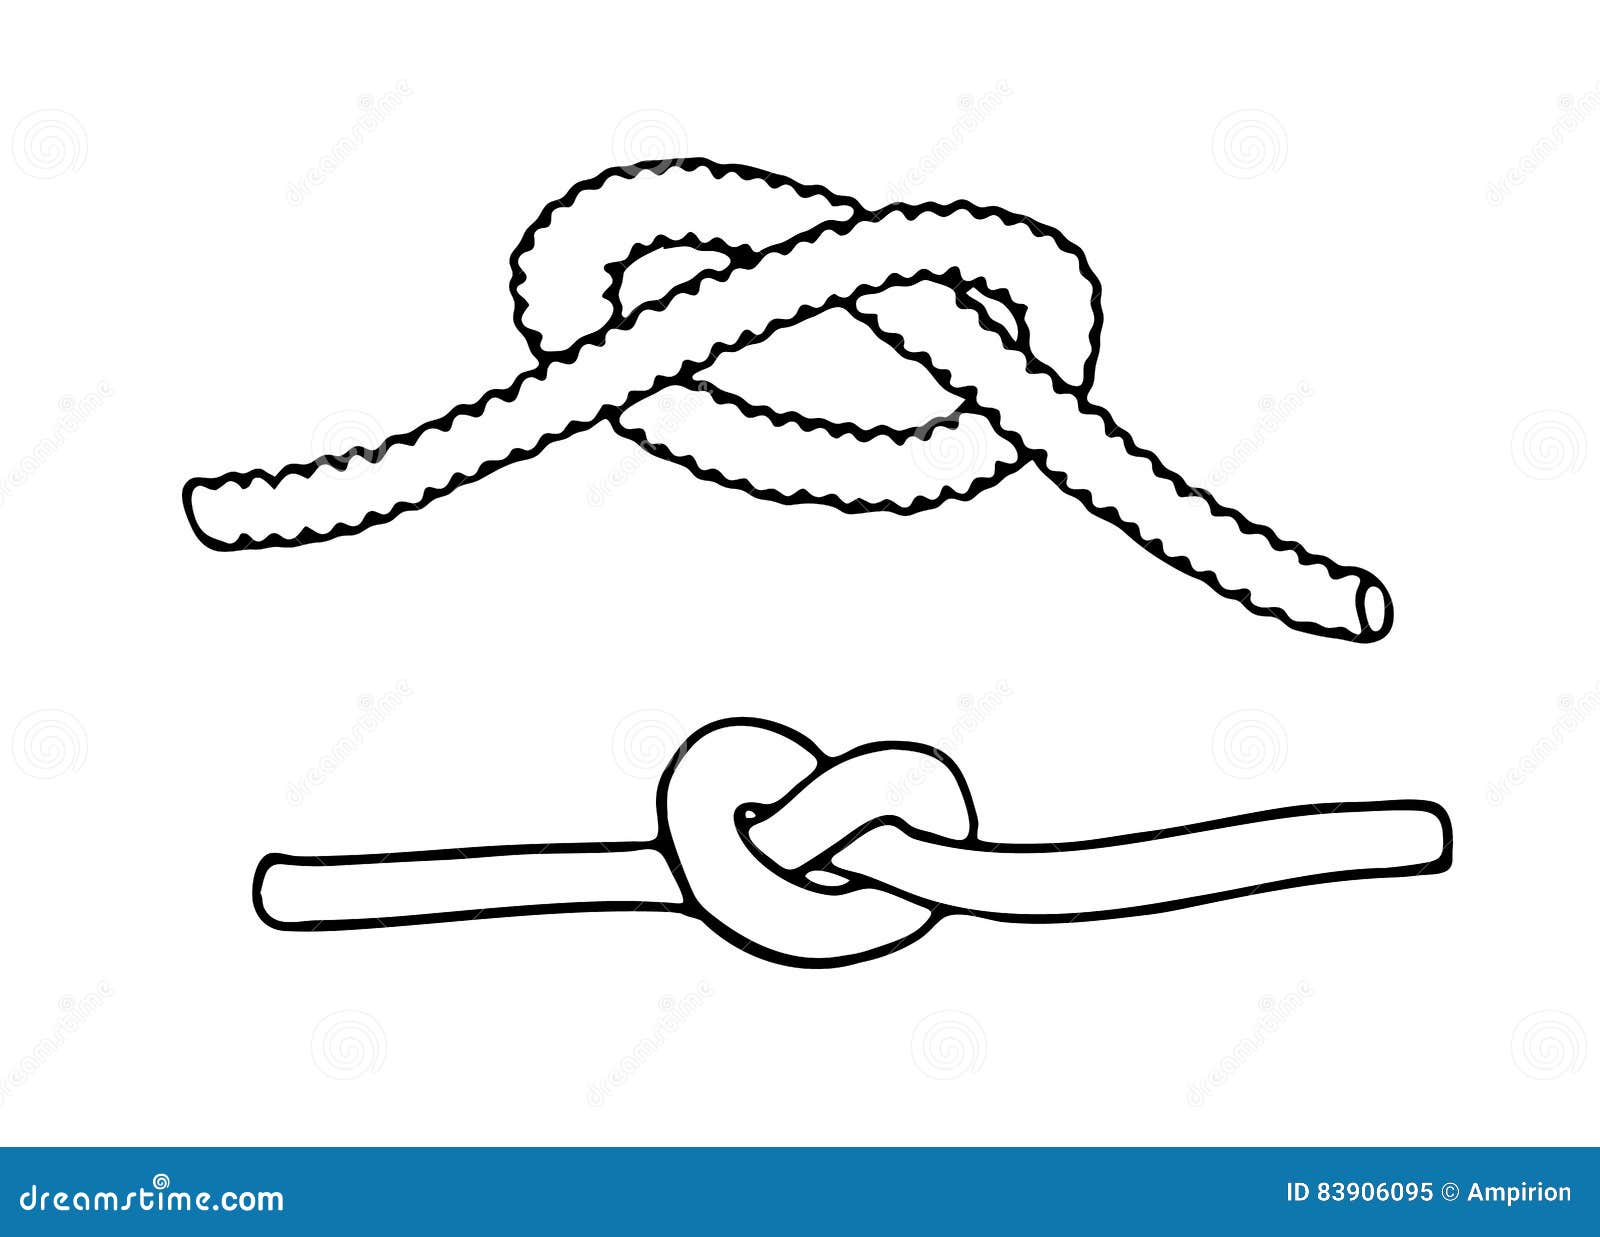 knot drawing